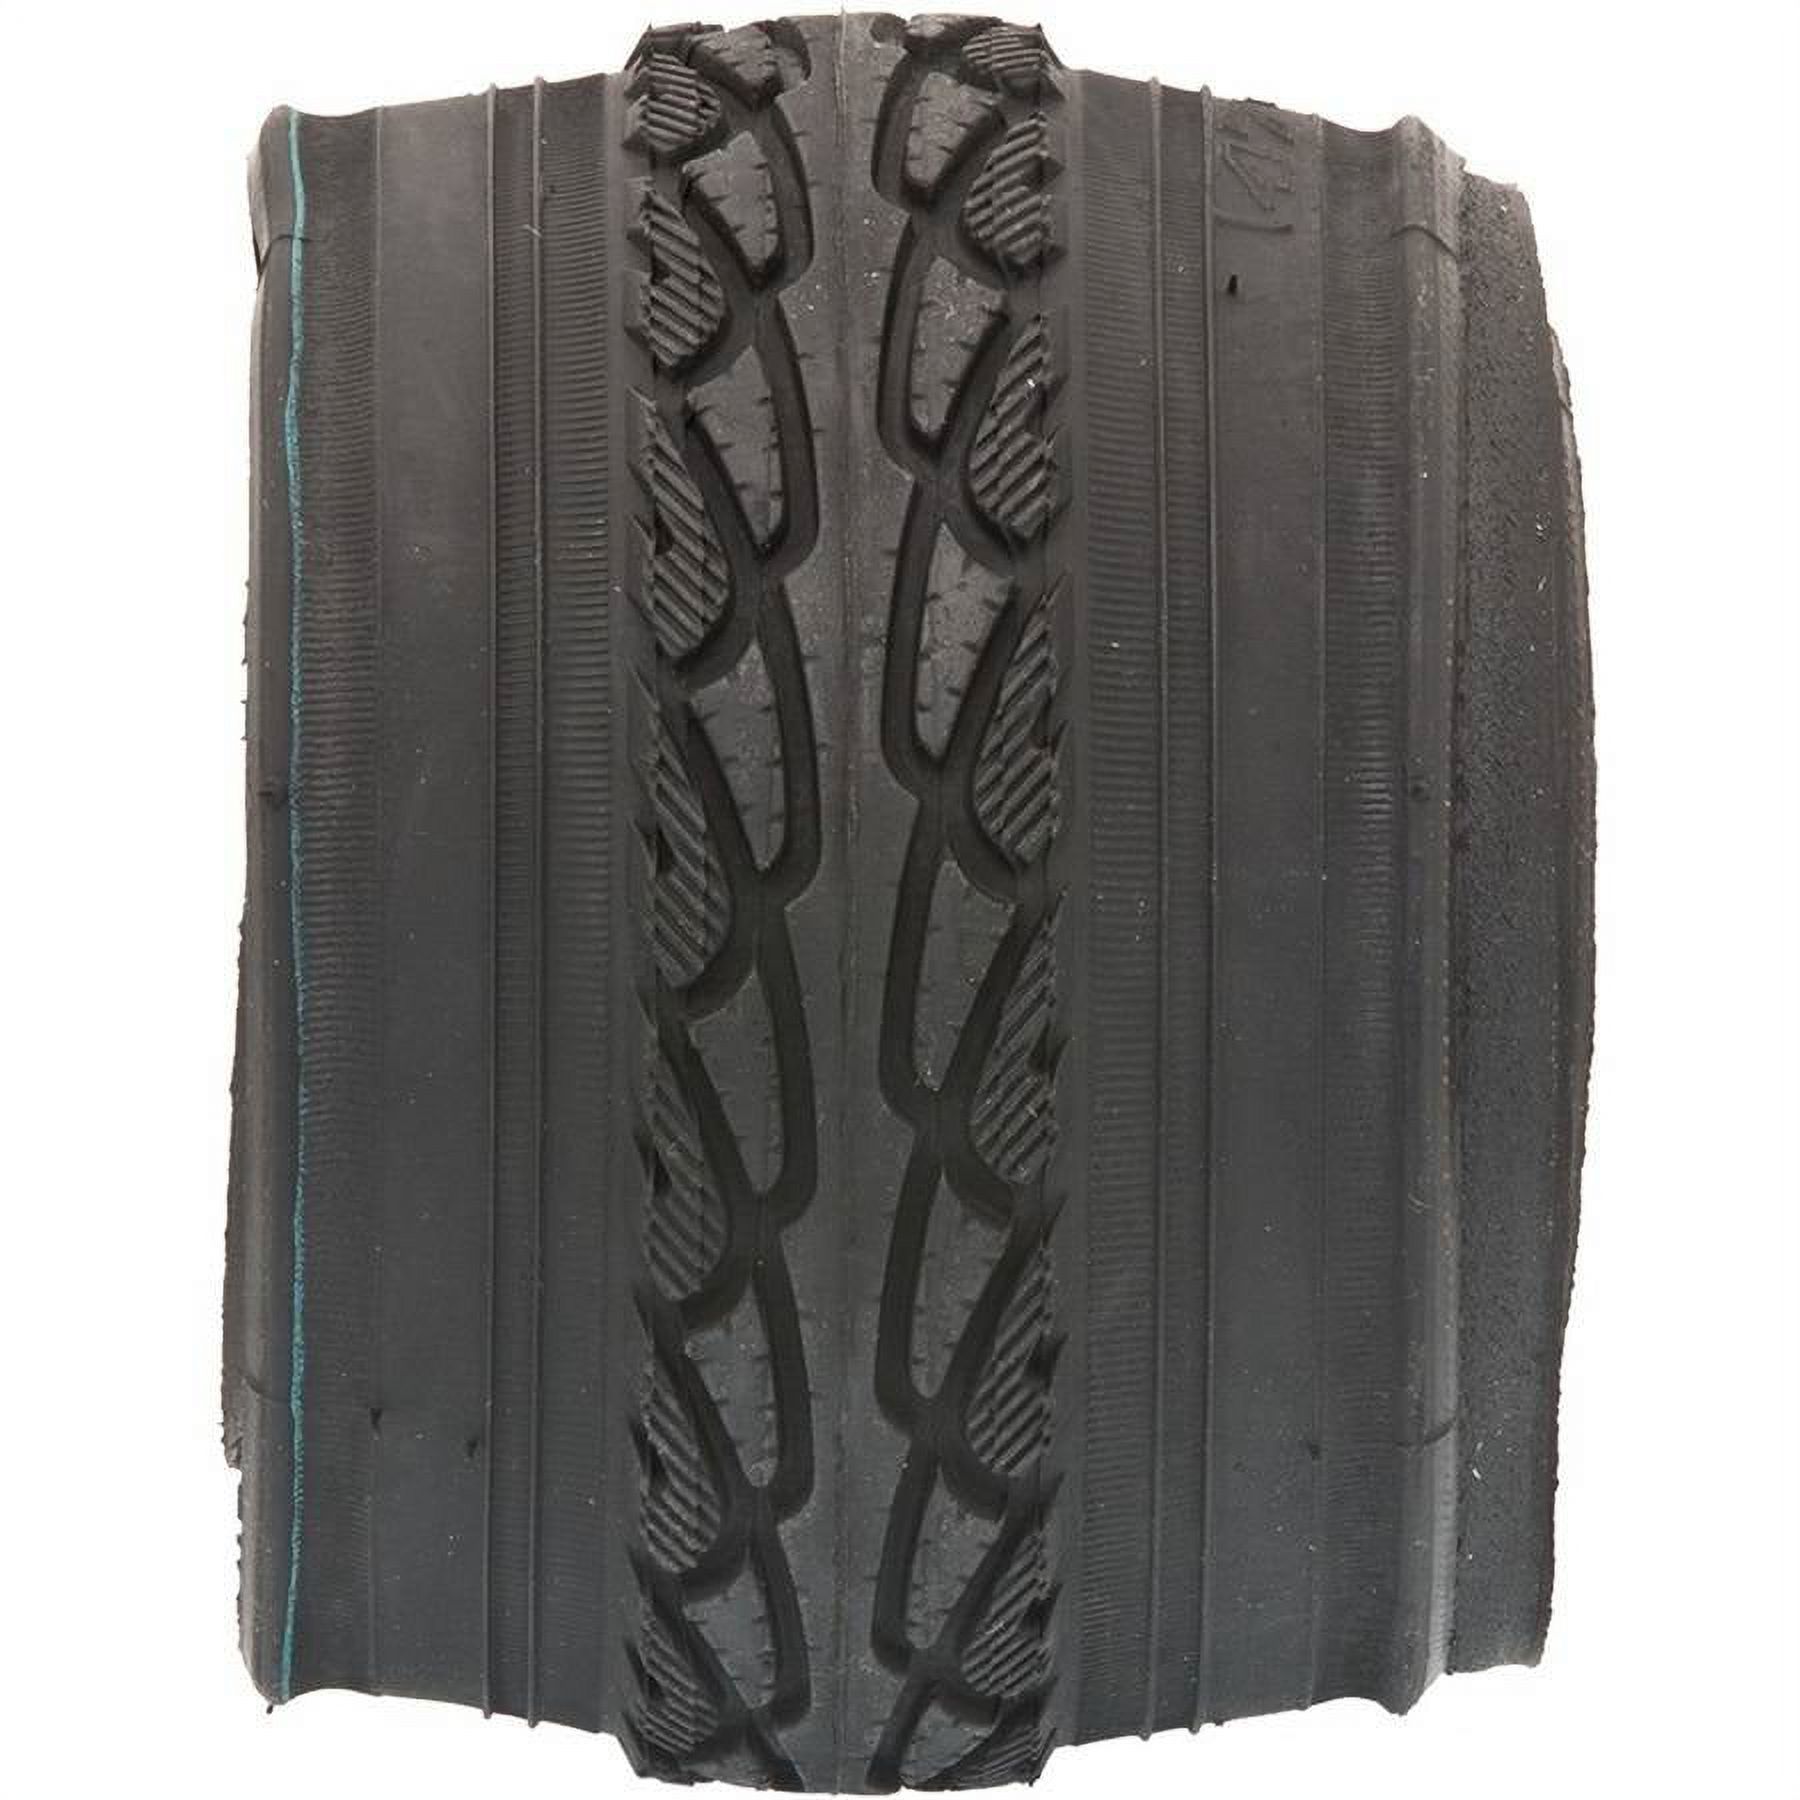 Bell Sports Comfort Glide Road Bike Tire with Kevlar, 26" x 1.75", Black - image 3 of 5